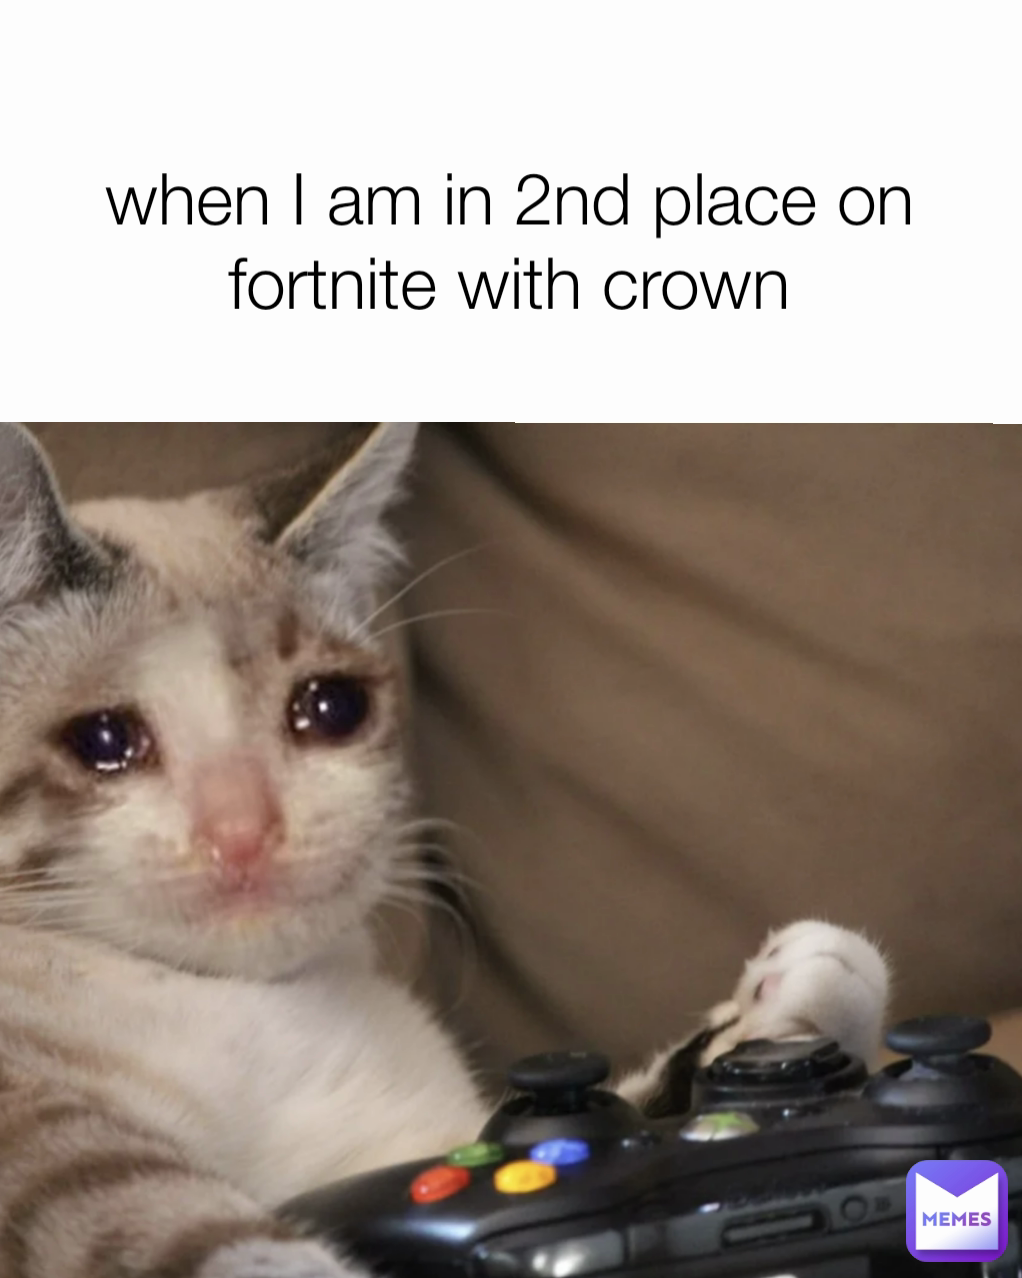 when I am in 2nd place on fortnite with crown